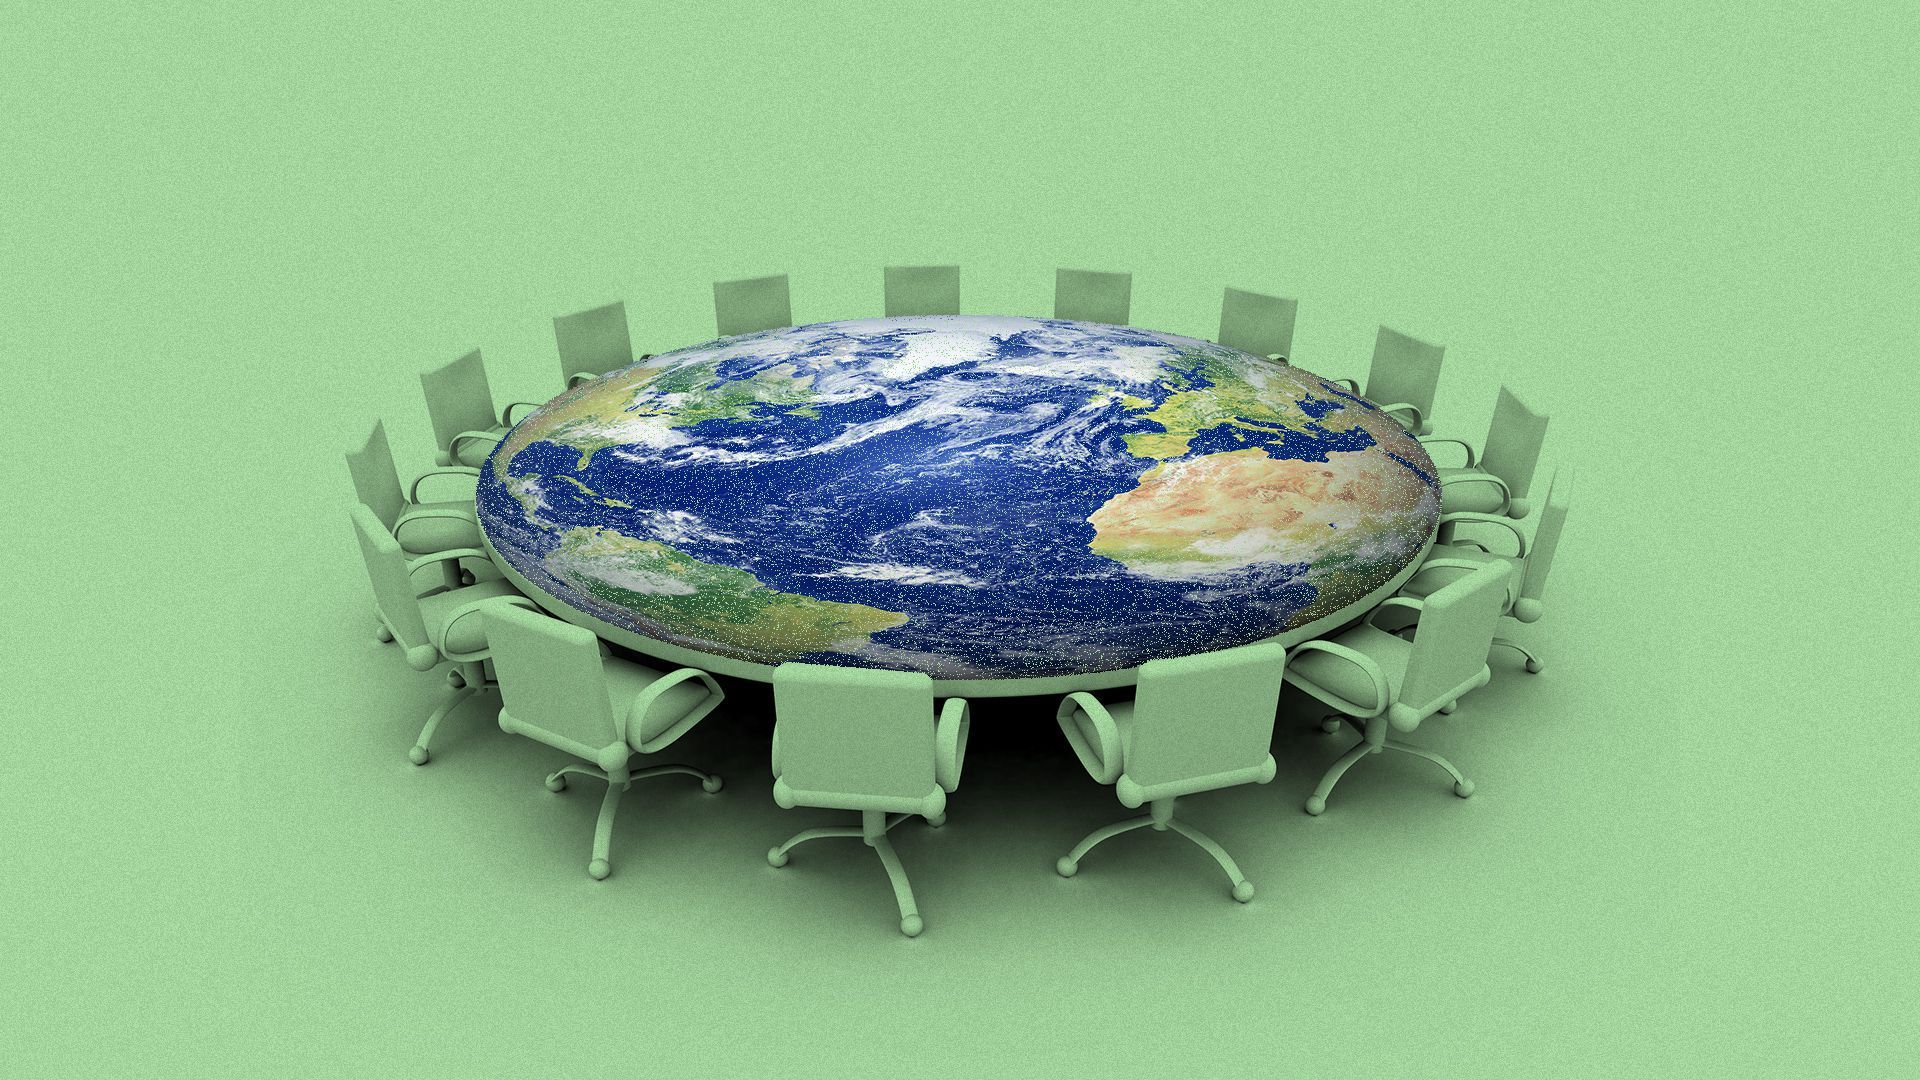 Illustration of green chairs around a flat Earth.